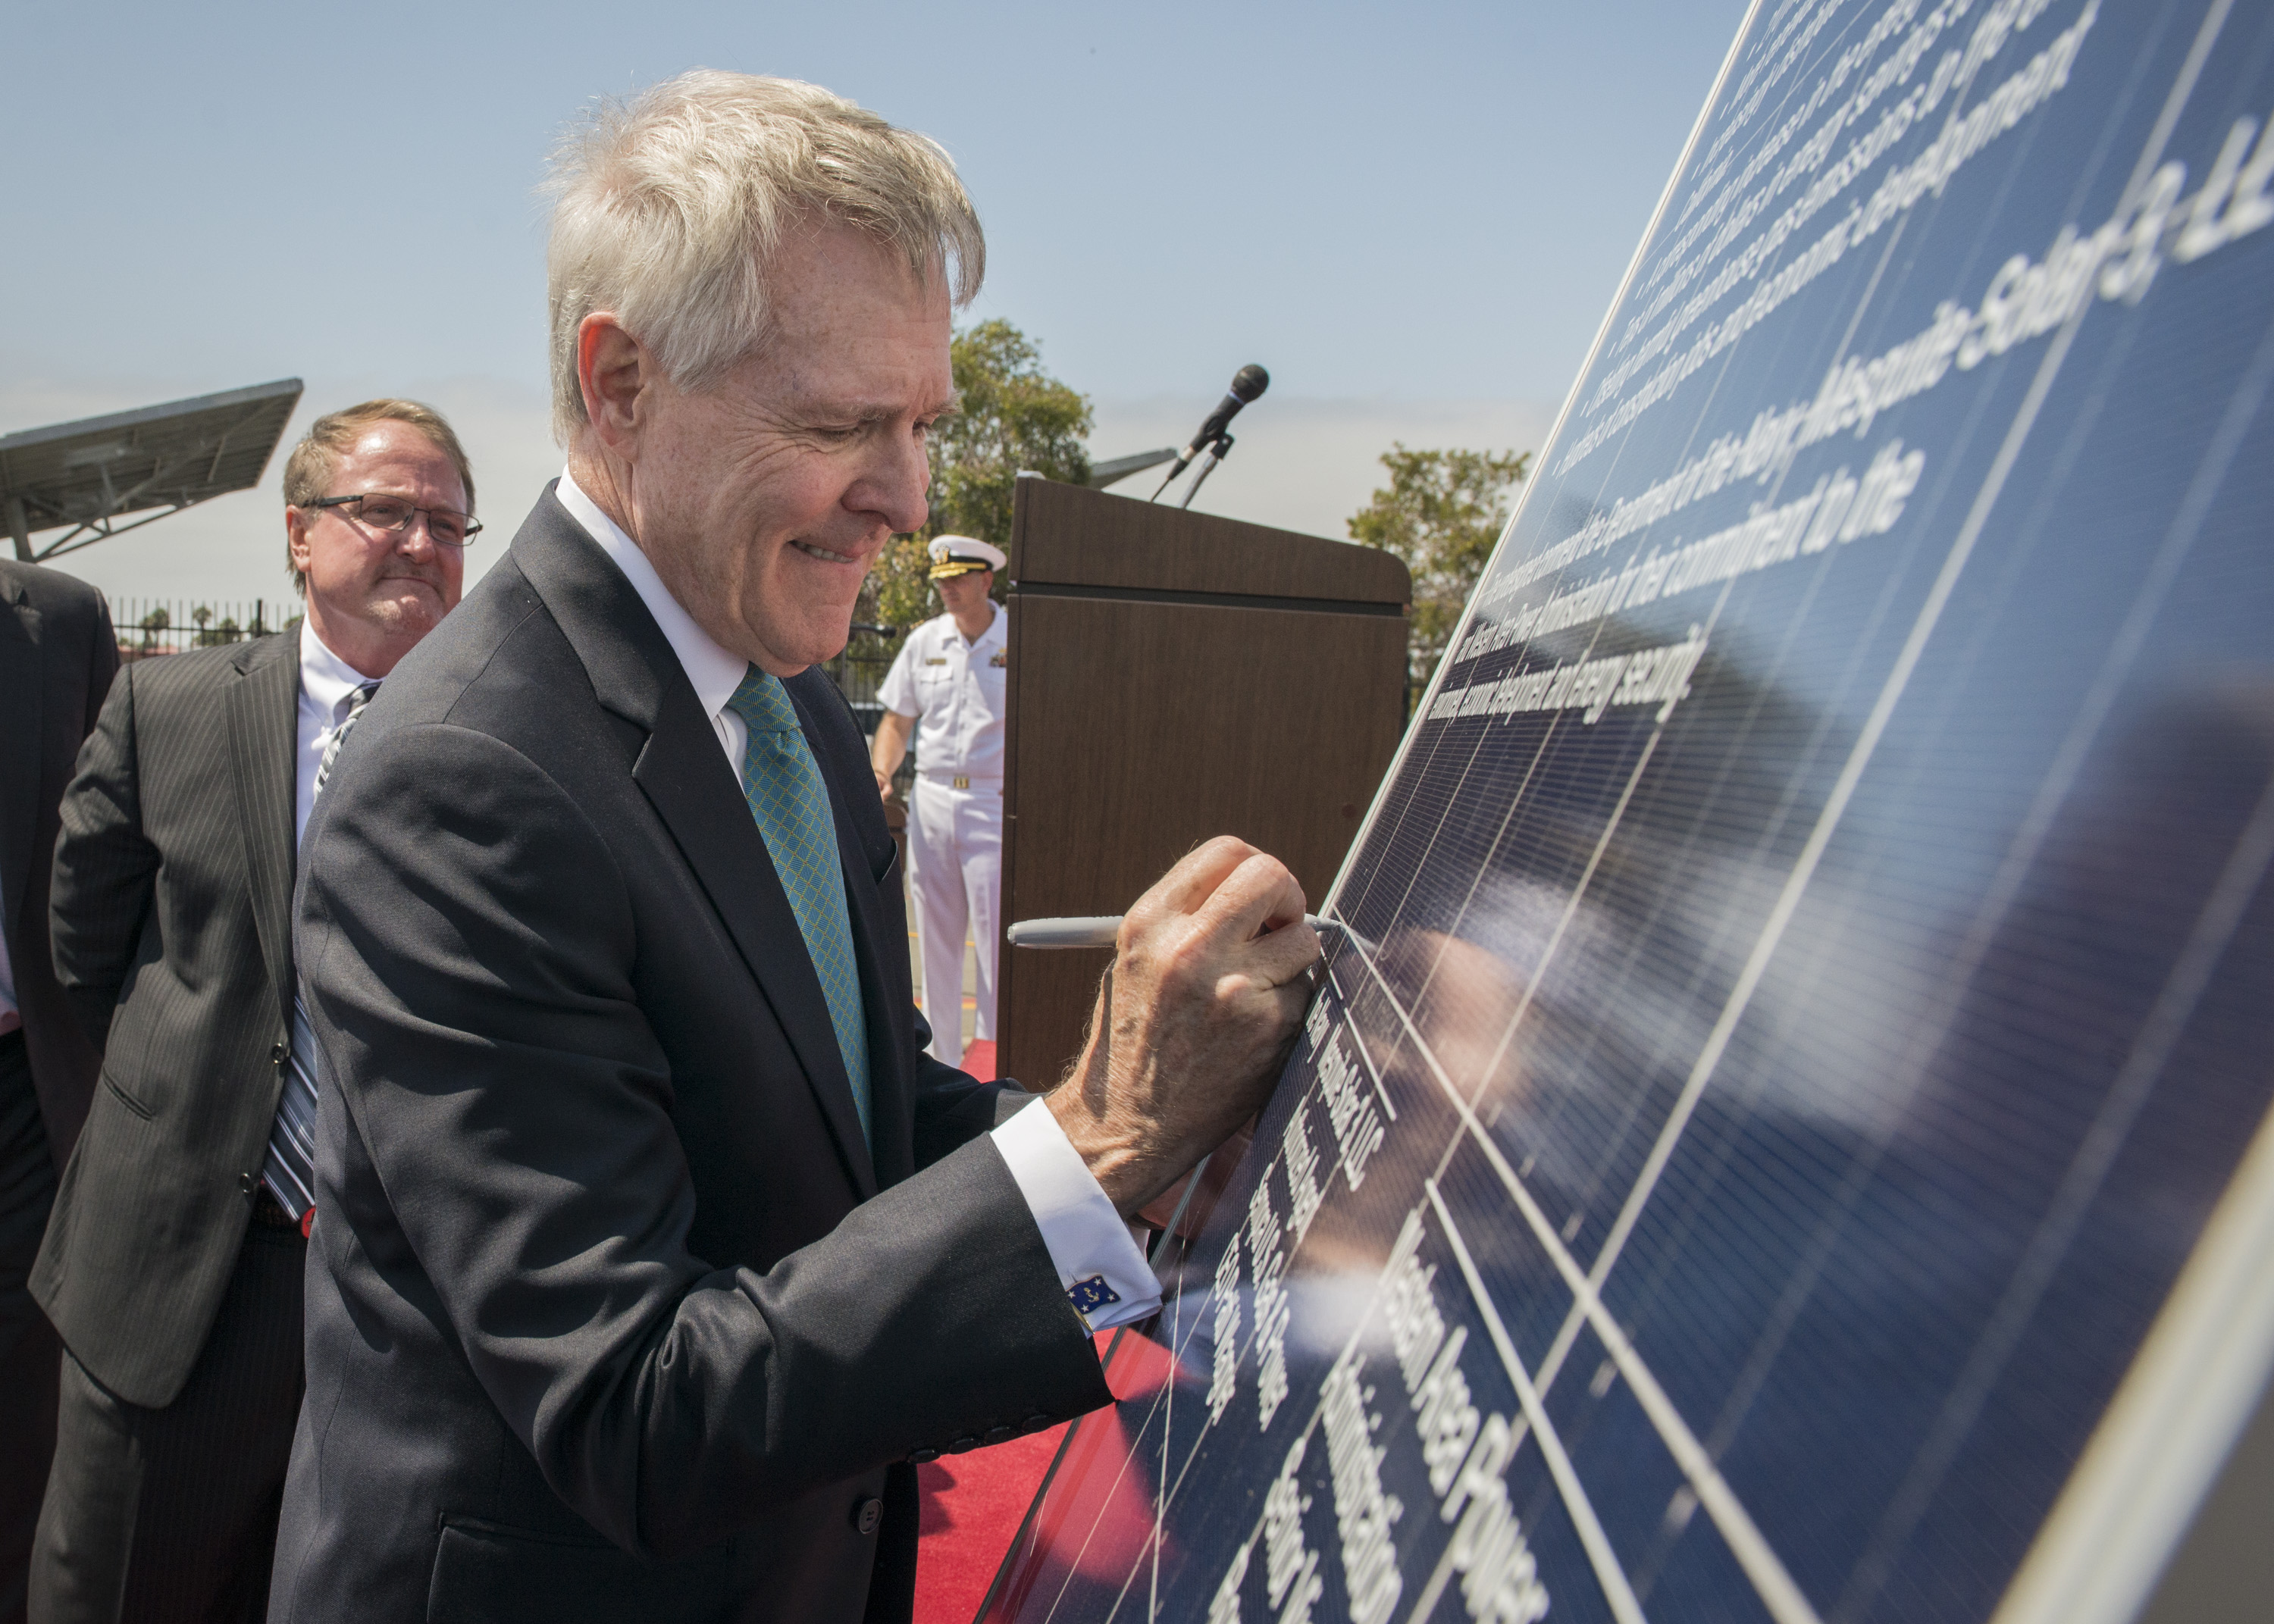 Secretary of the Navy (SECNAV) Ray Mabus signs a solar panel during a ceremony commemorating an agreement with Western Area Power Administration and Sempra U.S. Gas & Power to construct a 210 megawatt direct current solar facility. US Navy Photo